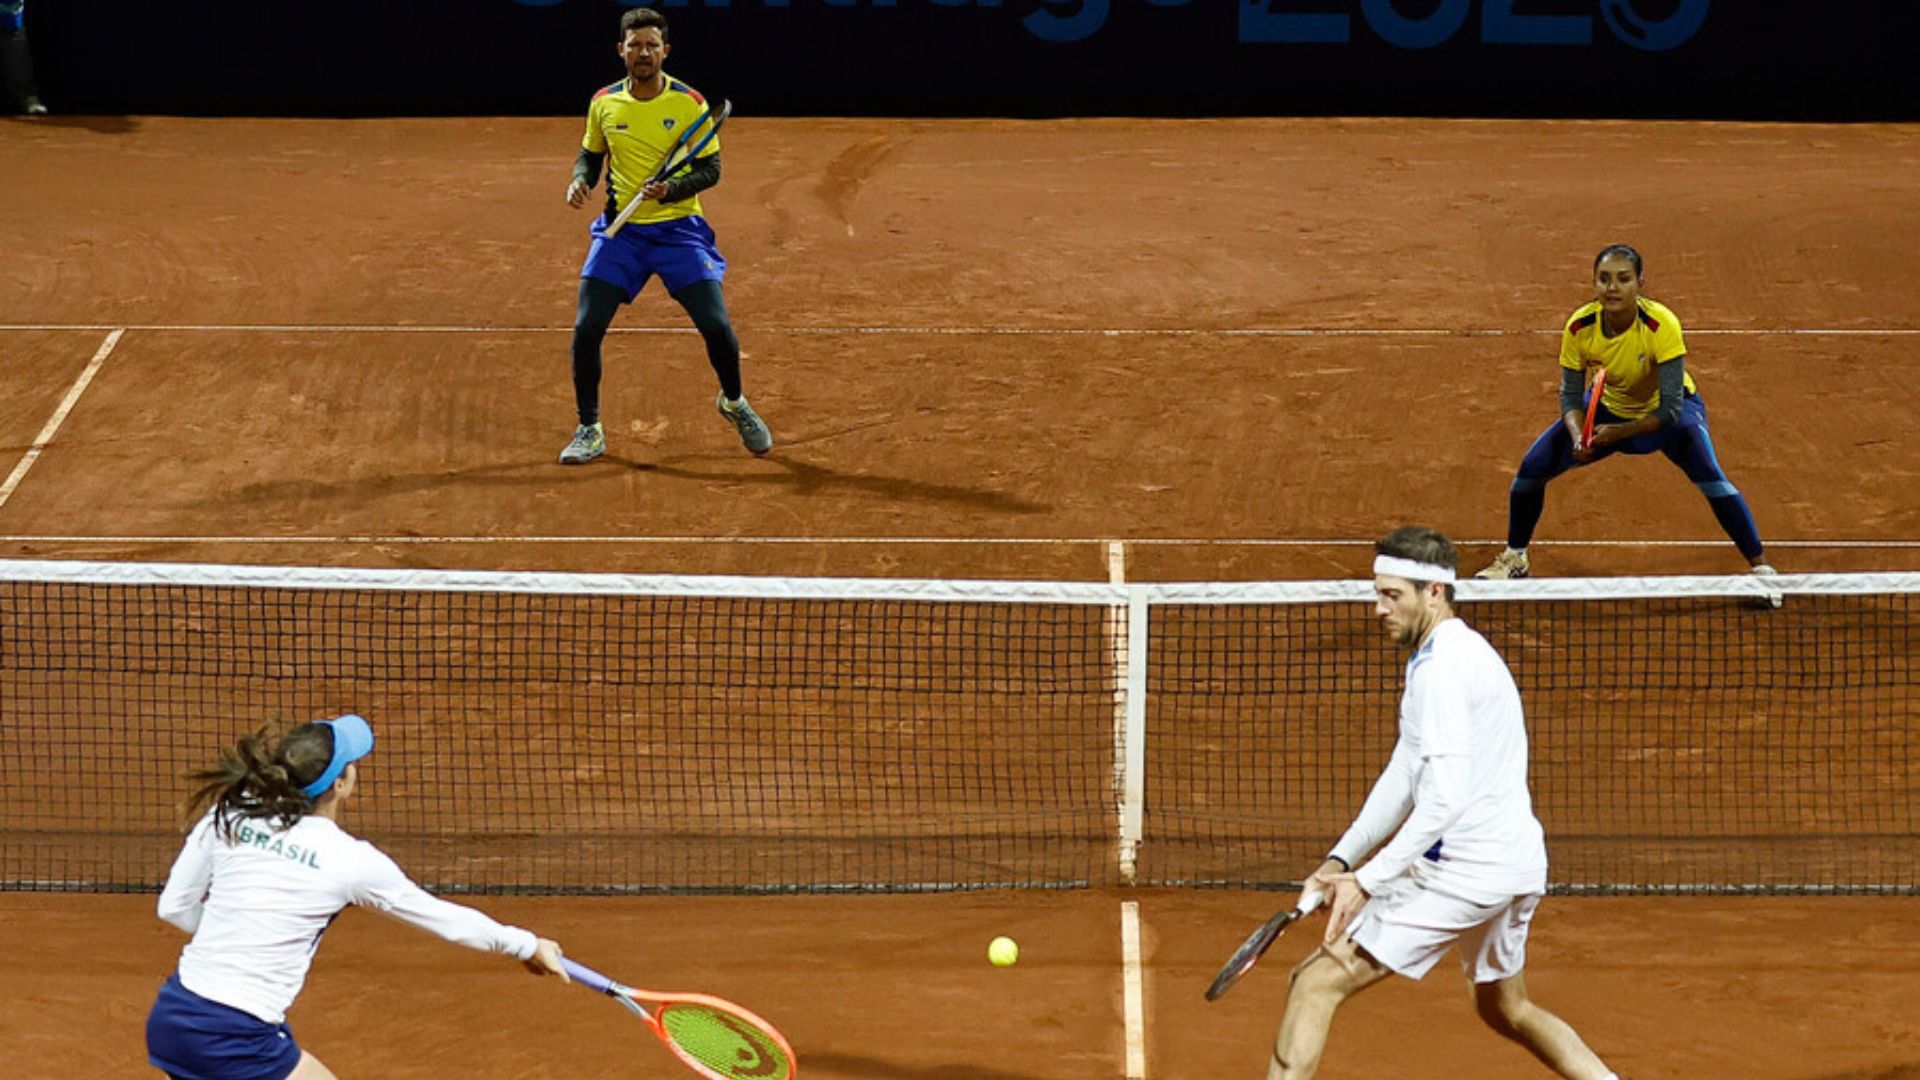 Colombia secures gold in Mixed Doubles Tennis by defeating Brazil